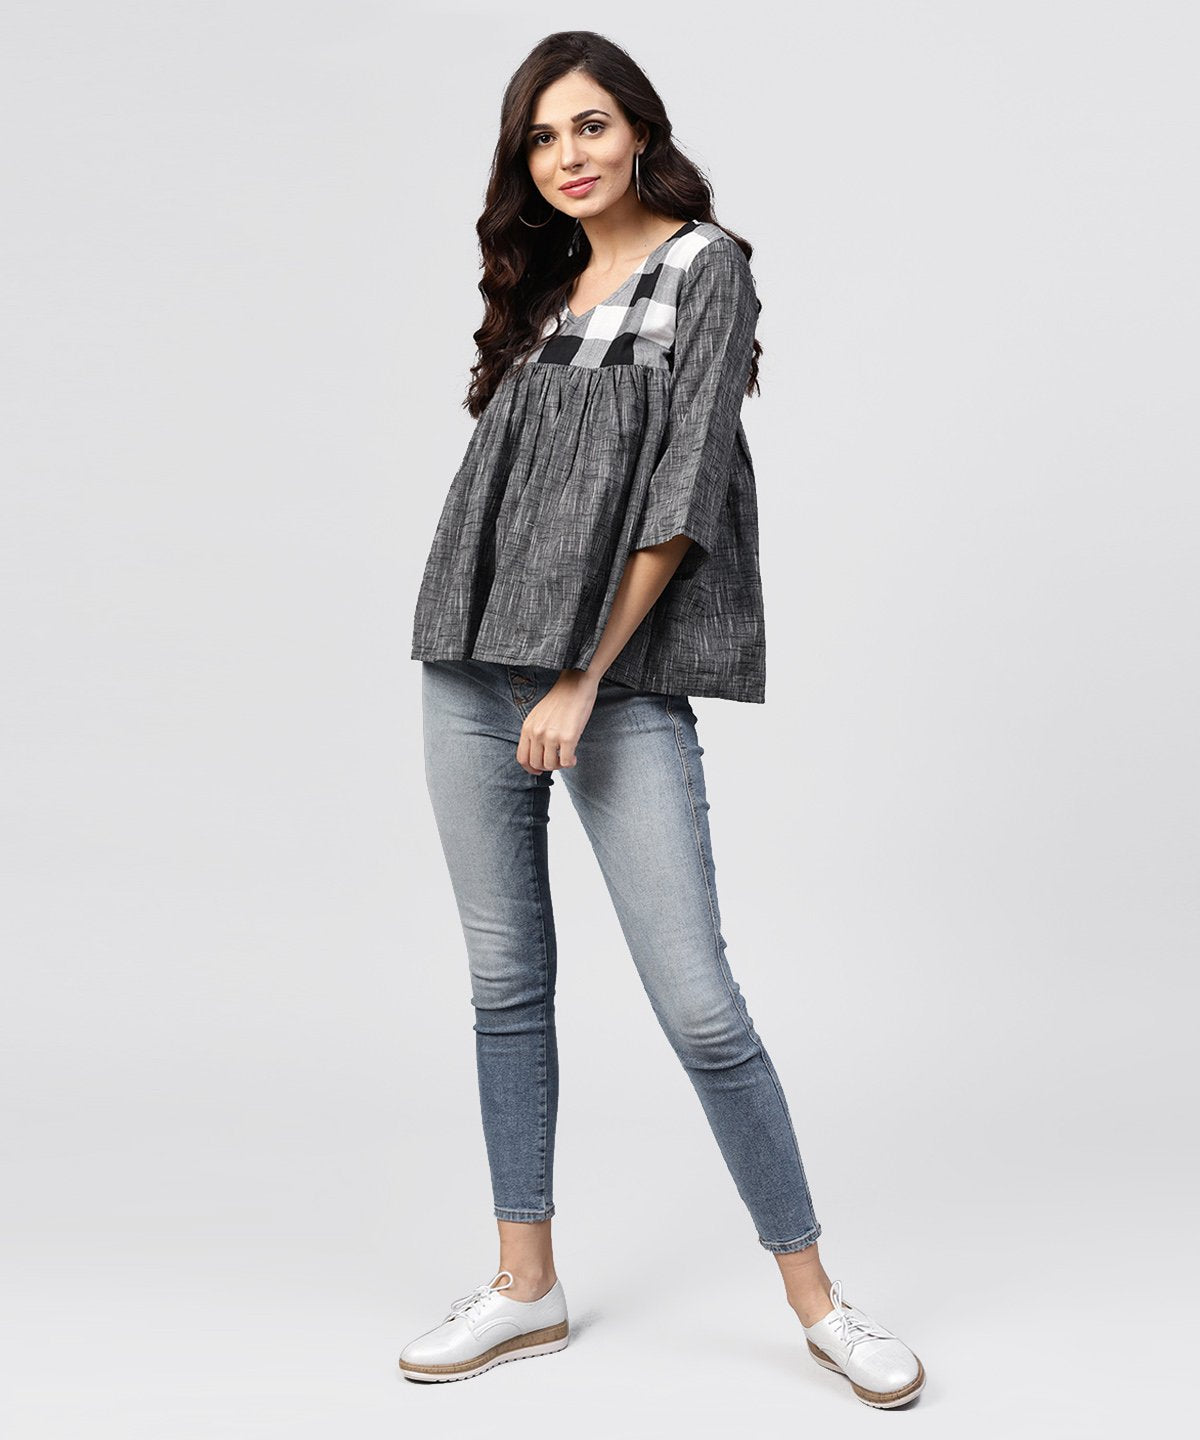 Women's Grey Top With V-Neck And Flared Sleeves - Nayo Clothing